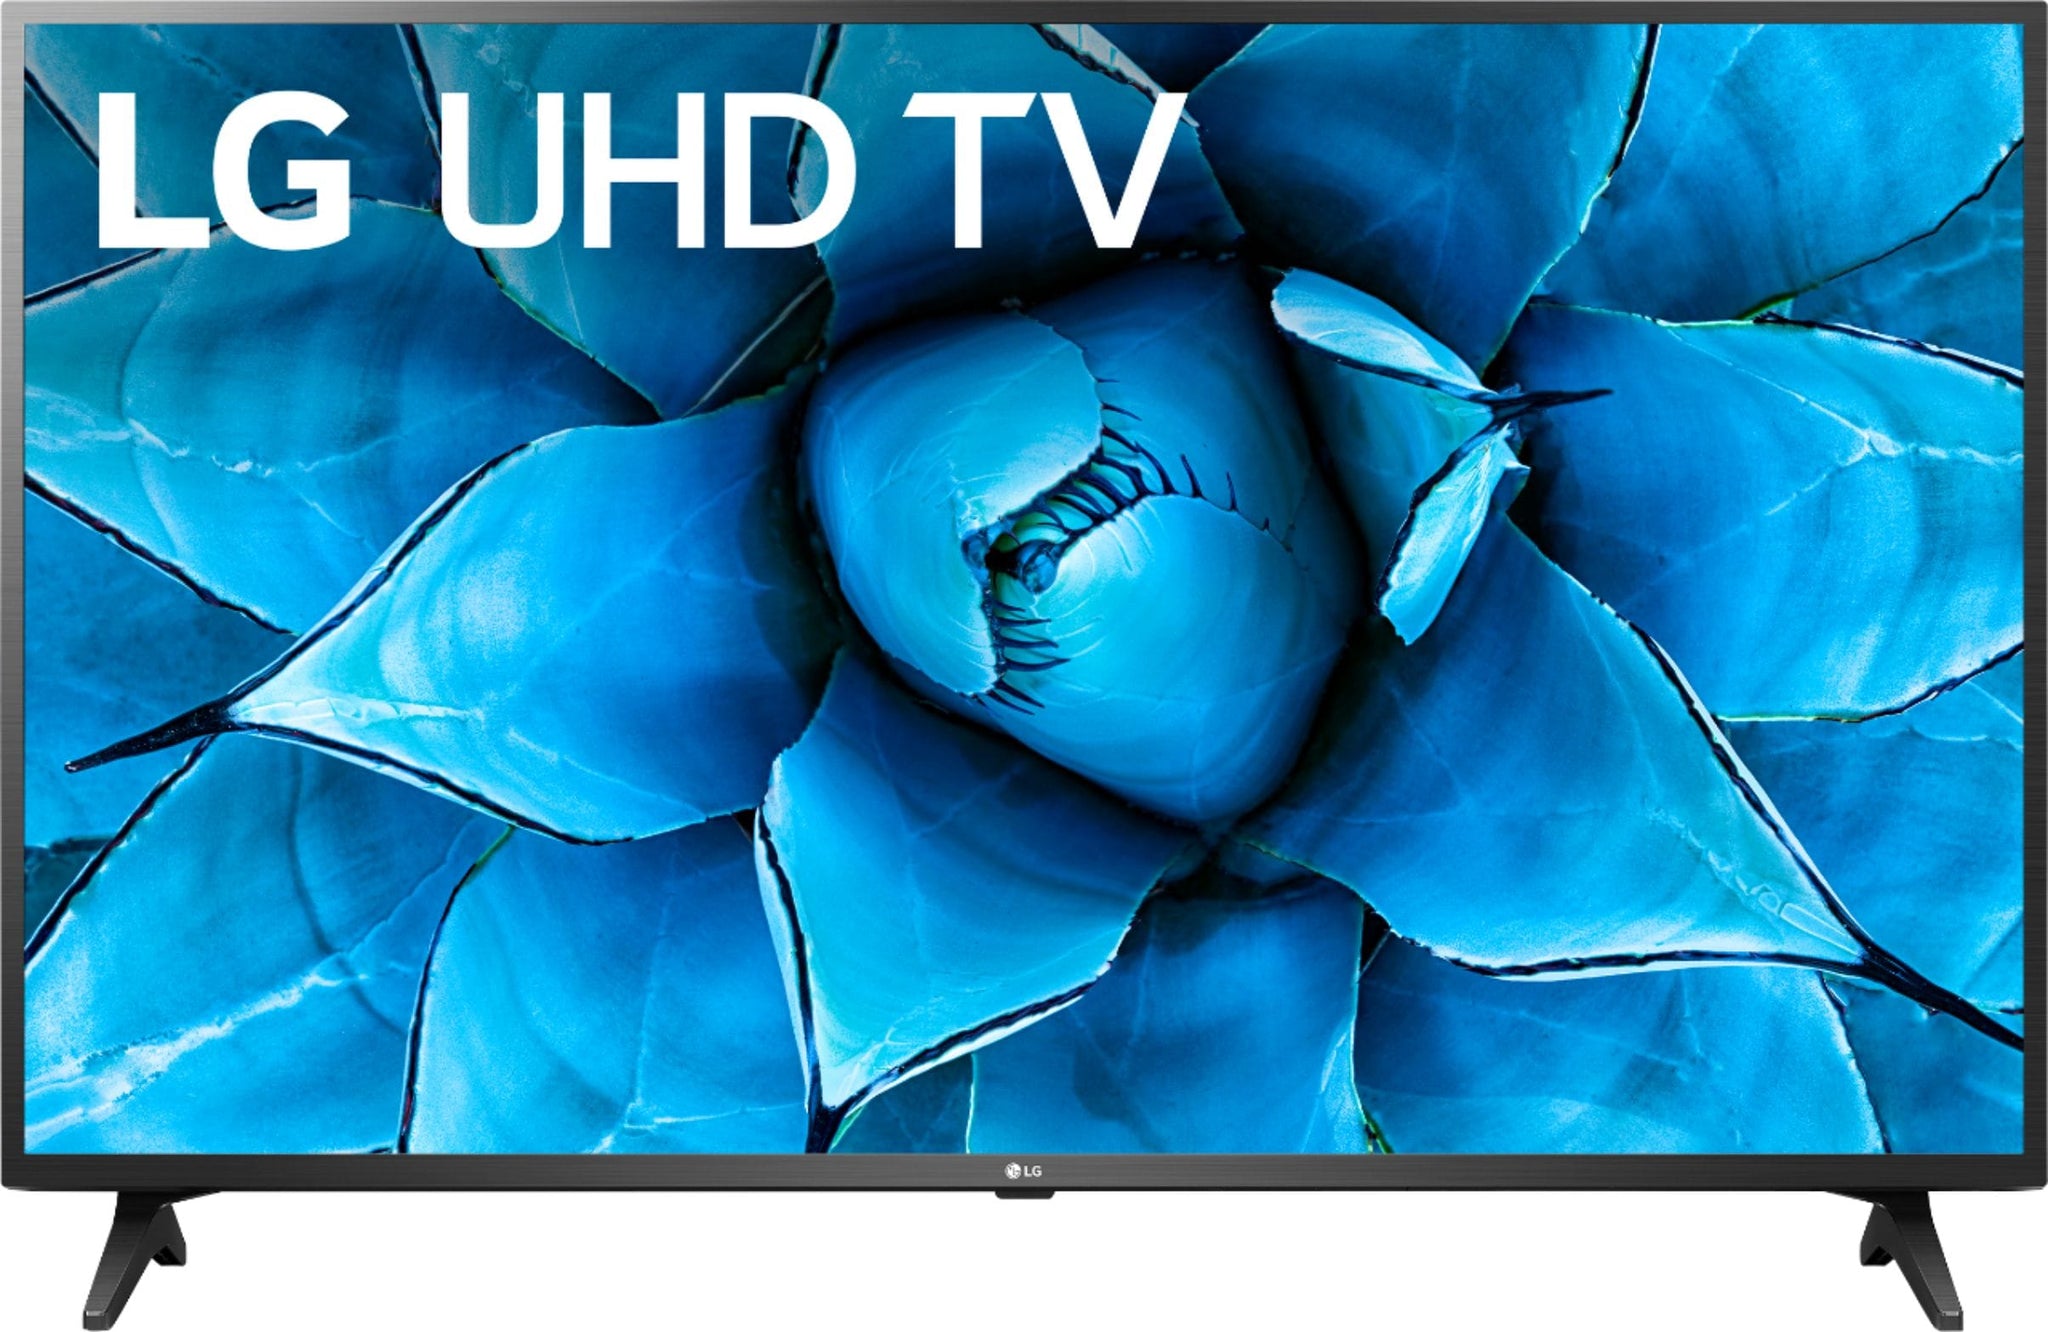 LG 55" 4K Smart webOS TV UHD w/ AI ThinQ(Refurbished) Tv's ONLY for delivery in San Diego and Tijuana